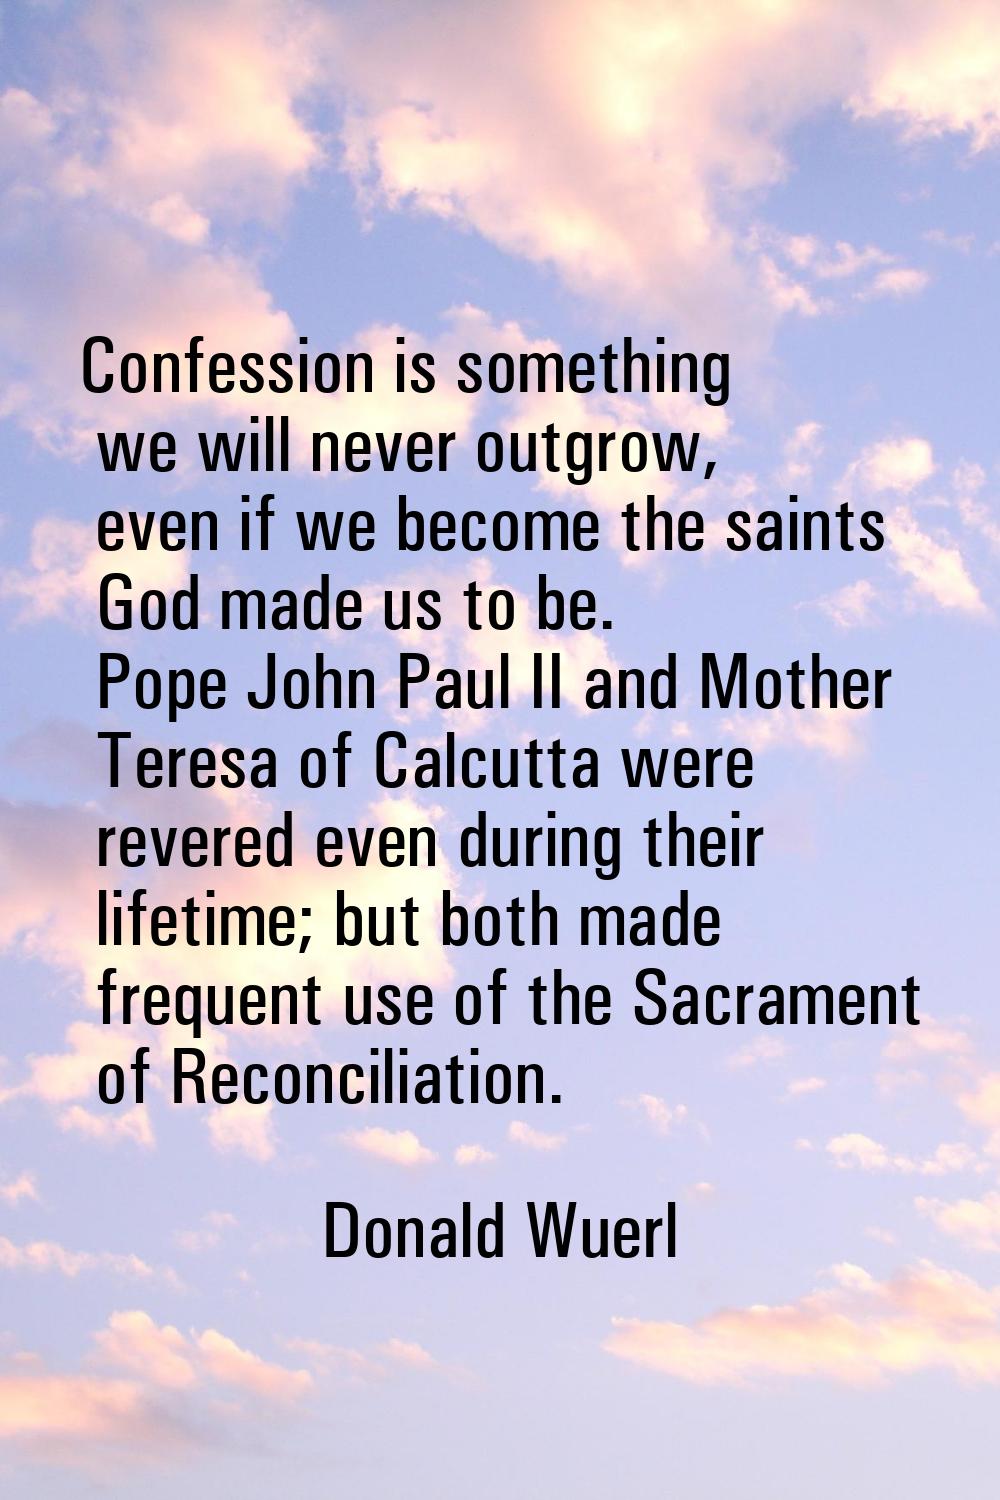 Confession is something we will never outgrow, even if we become the saints God made us to be. Pope